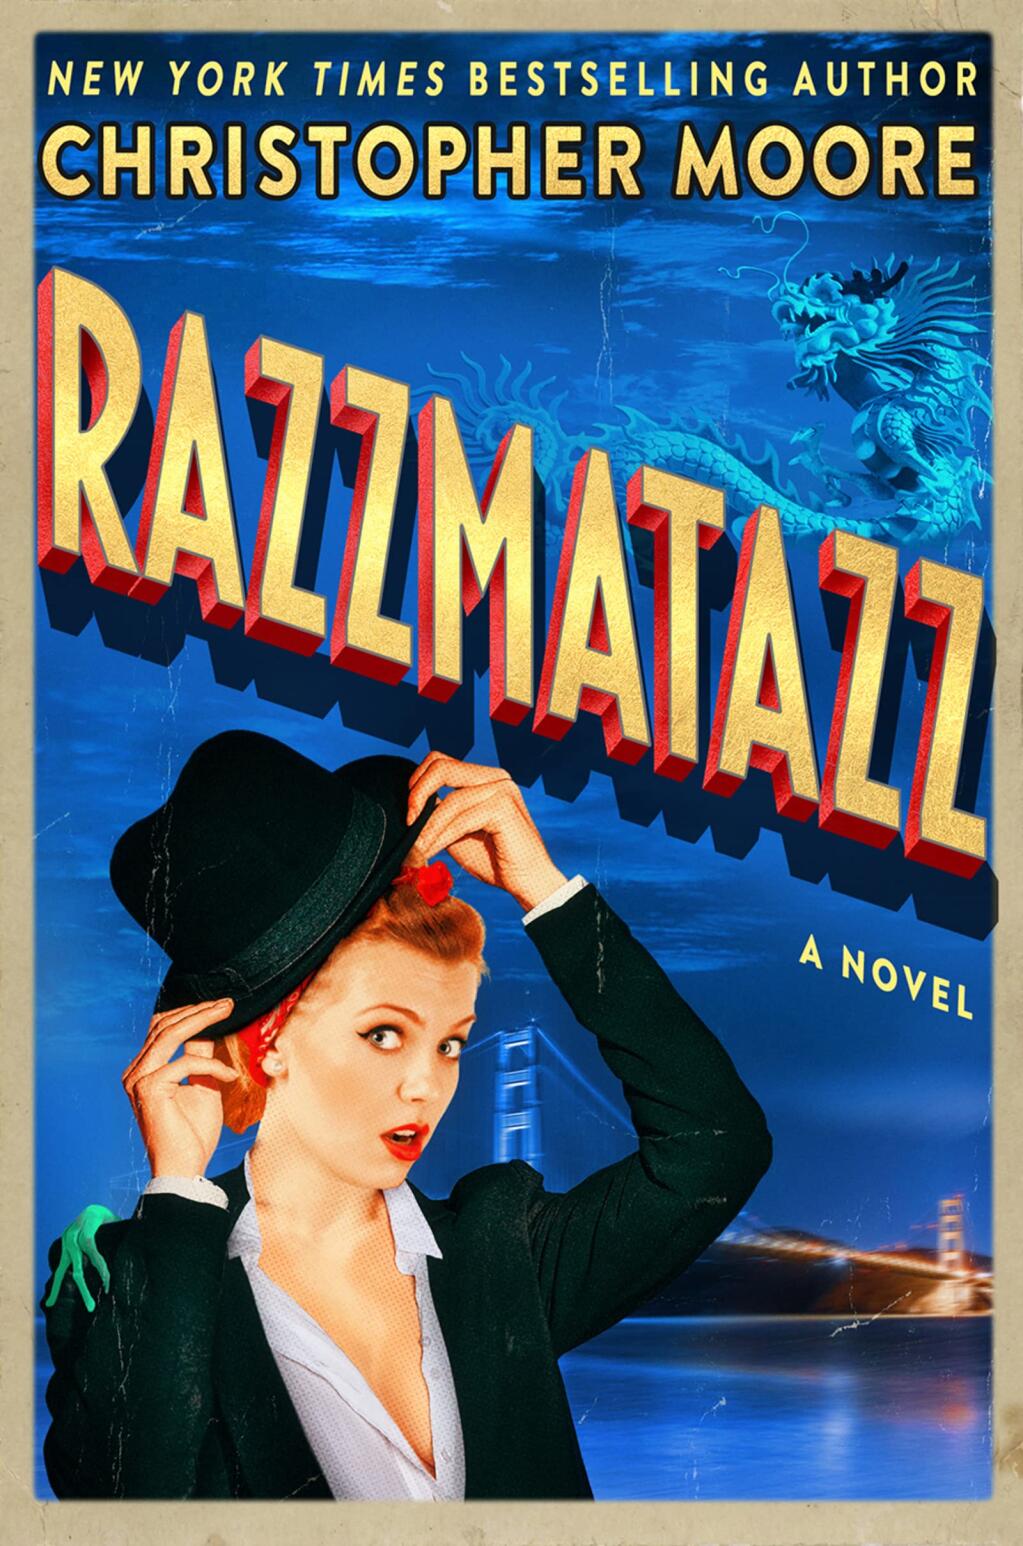 Christopher Moore’s “Razzmatazz” is the No. 1 bestselling book in Petaluma this week. (WILLIAM MORROW BOOKS)